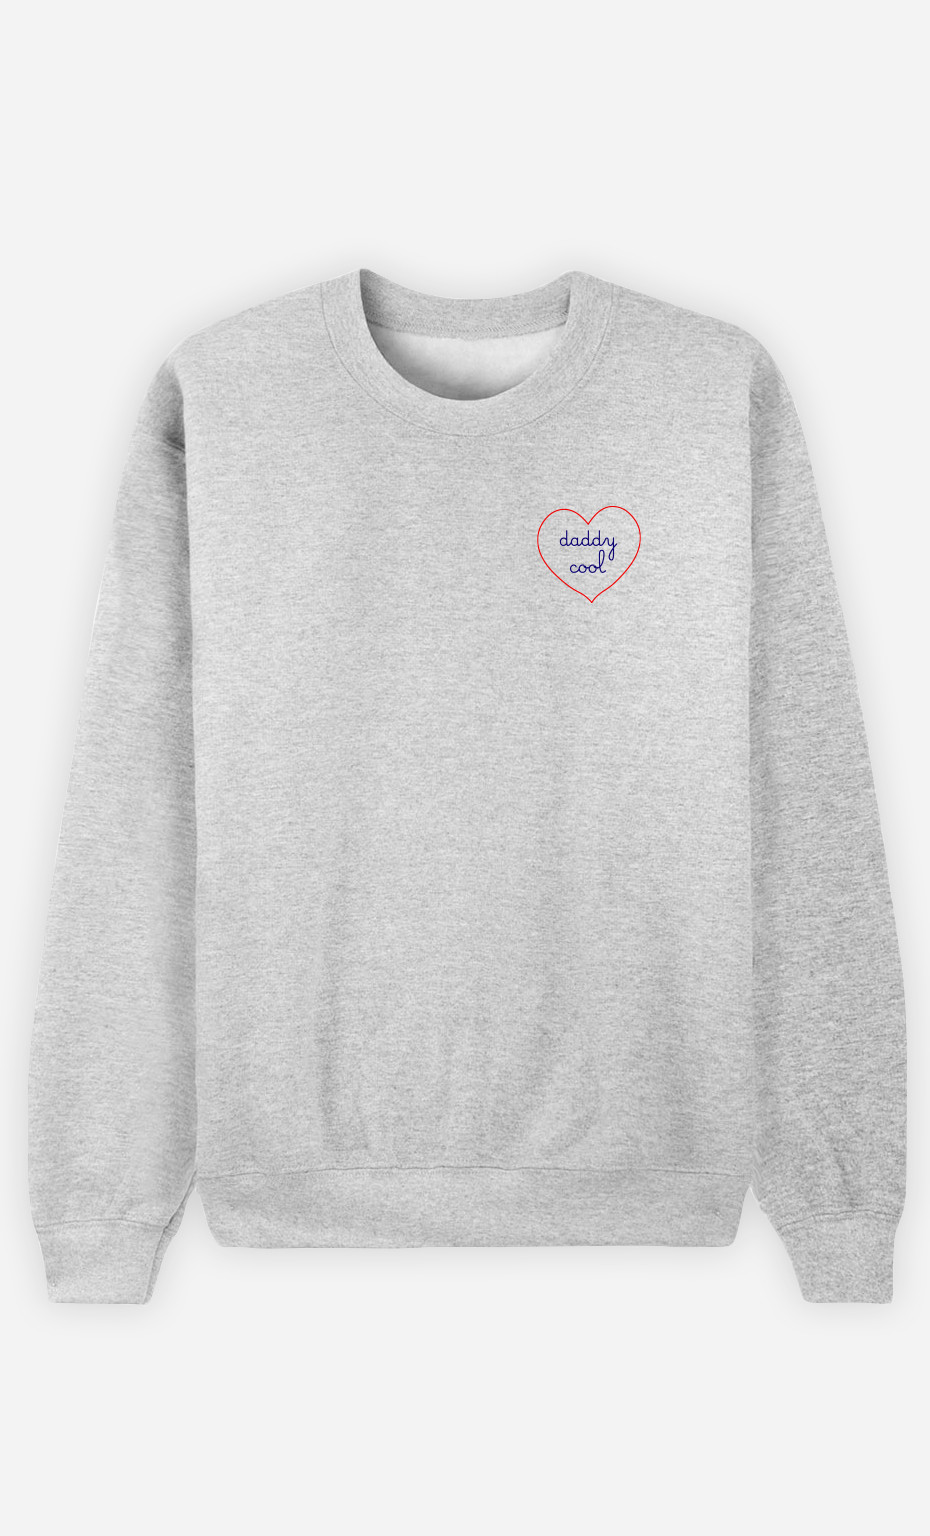 Sweatshirt Daddy Cool - embroidered